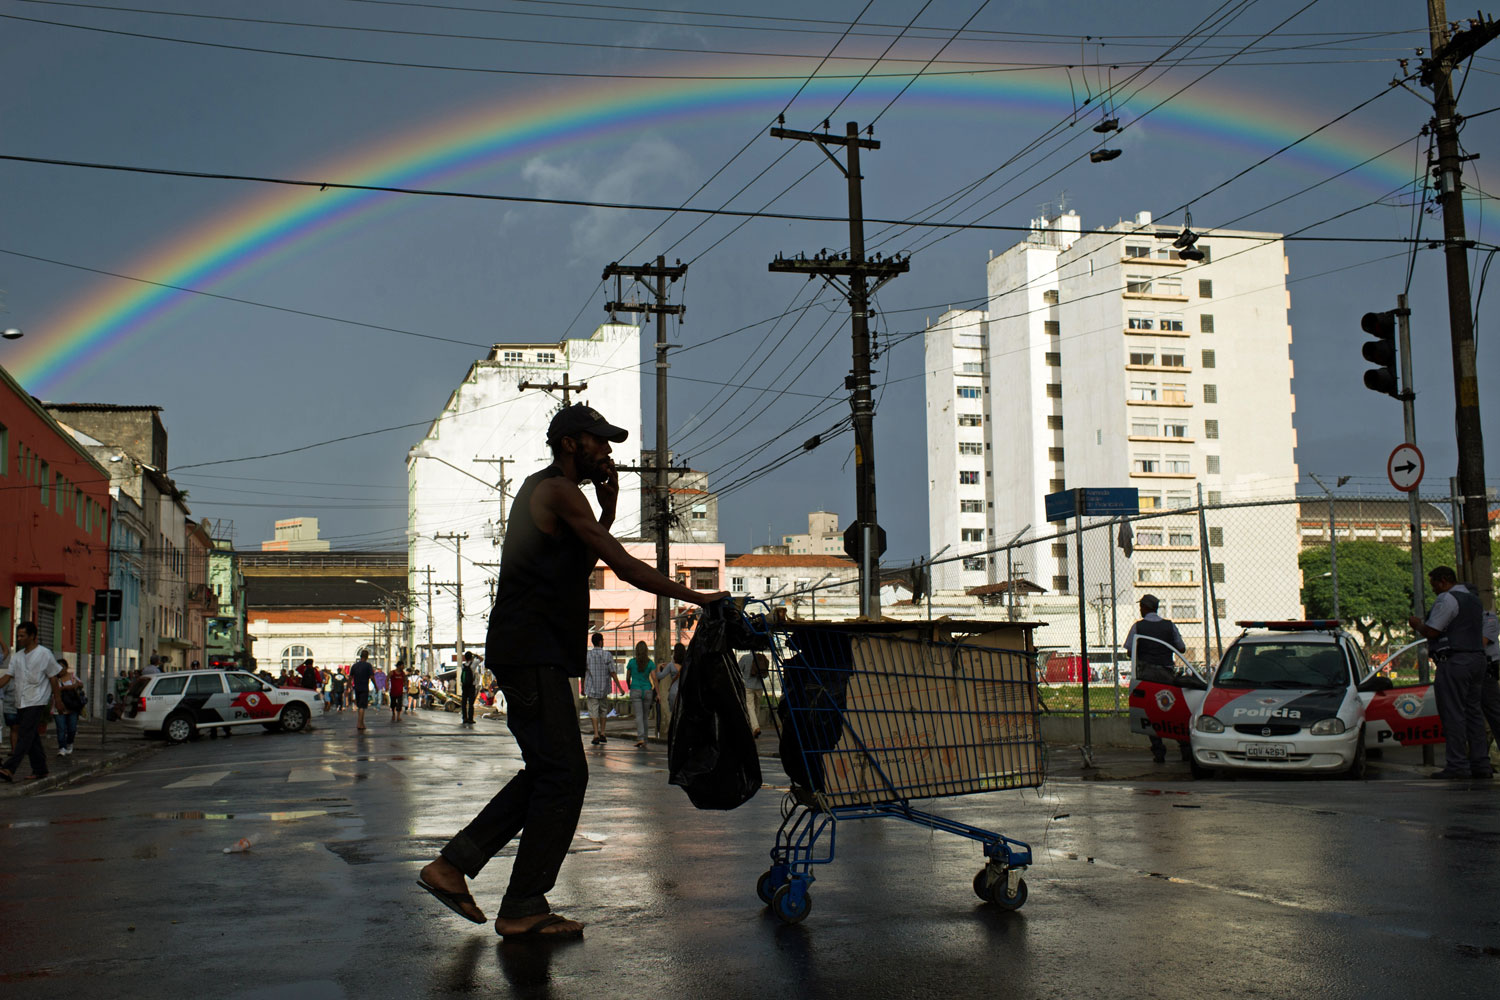 Help for the Powerless
                              Jan. 14, 2012. A homeless man pushes a cart as a rainbow arcs acoss the sky in an area called  Cracolandia  (Crackland in English), in downtown Sao Paulo, Brazil.